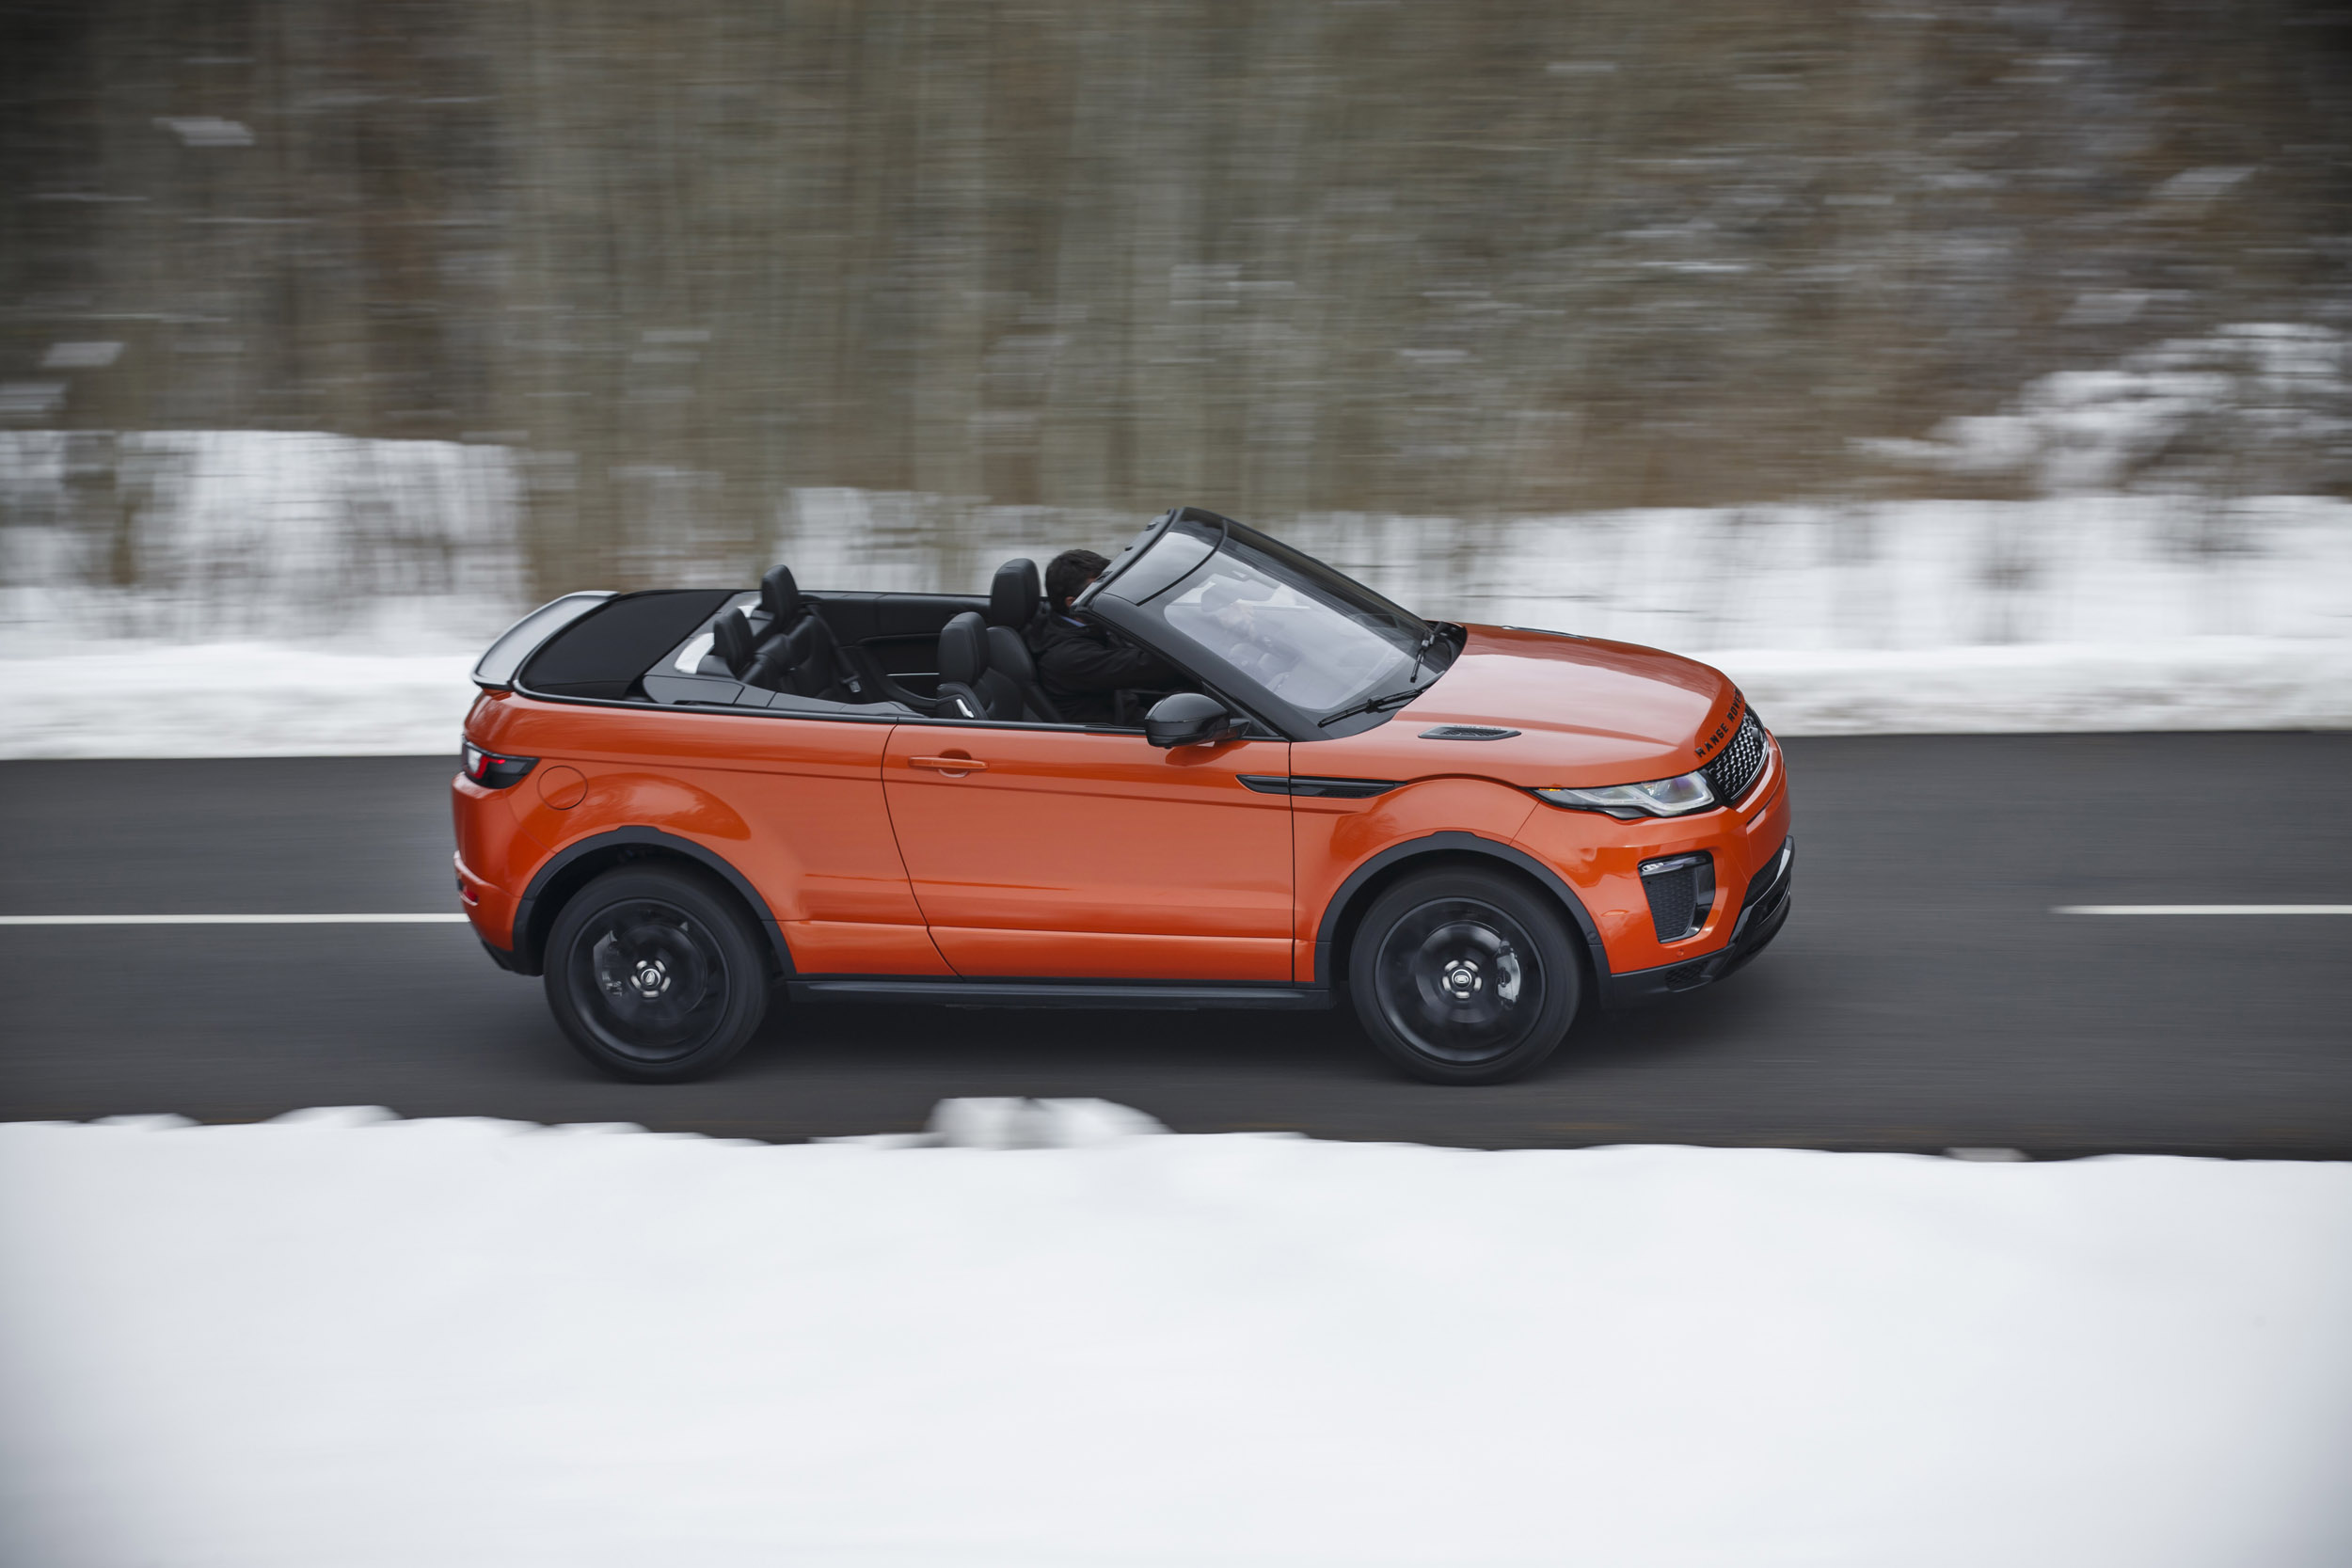 Range Rover Evoque Convertible Review Prices Specs And 0 60 Time Evo